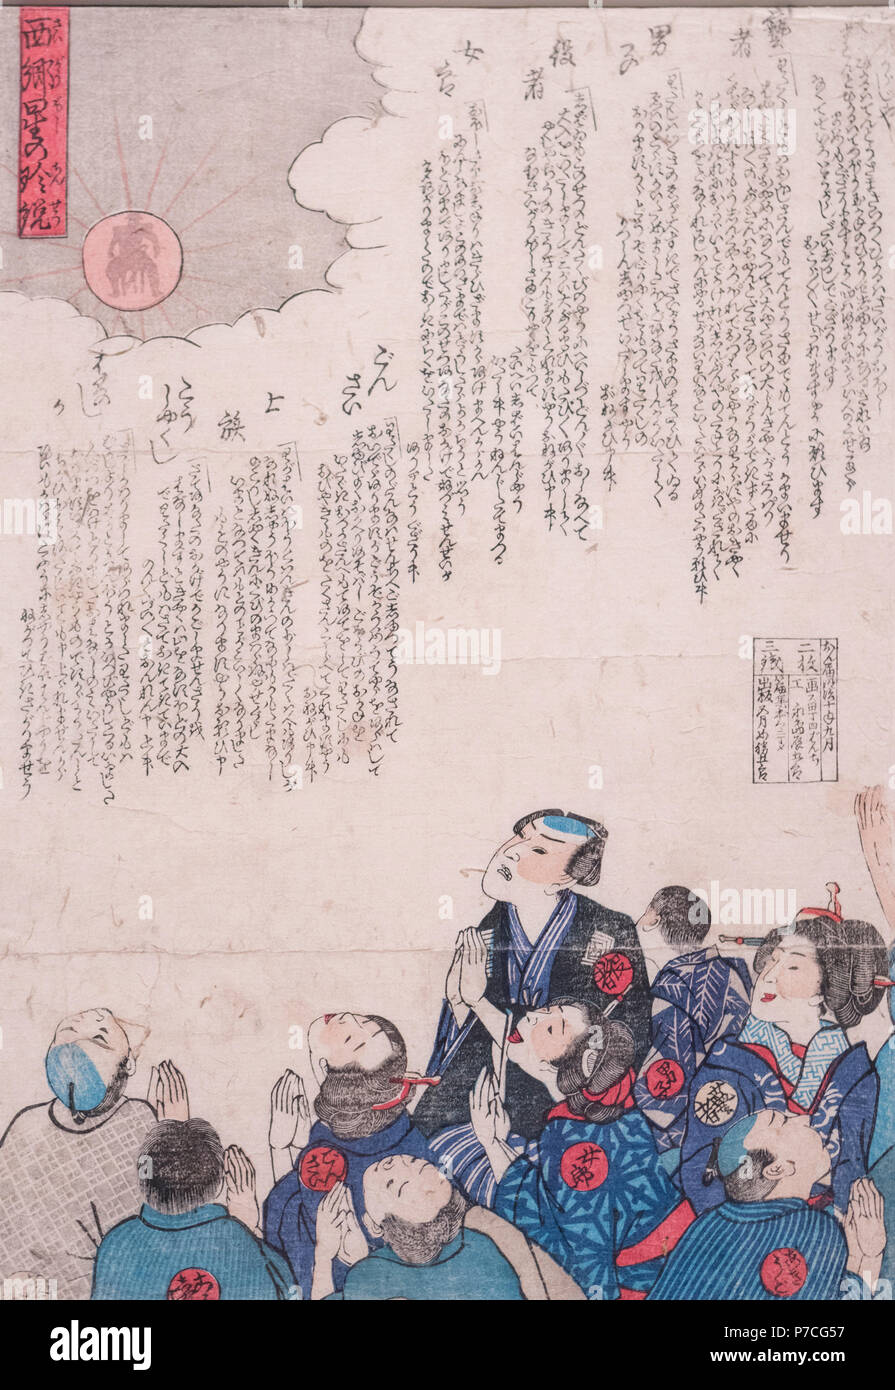 Saigo boshi no chinsetsu (A rare story of Saigo star) 1877, by Utagawa Yoshitora, Private Collection.  Saigo boshi means 'The last star' in Japanese. In 1877, Takamori Saigo died in Satsuma Rebellion. This year, the Mars had came close to the earth and emitted strong light. Then rumor that Takamori Saigo was seen in the star was distributed. Many pictures were created related in that incident. Stock Photo